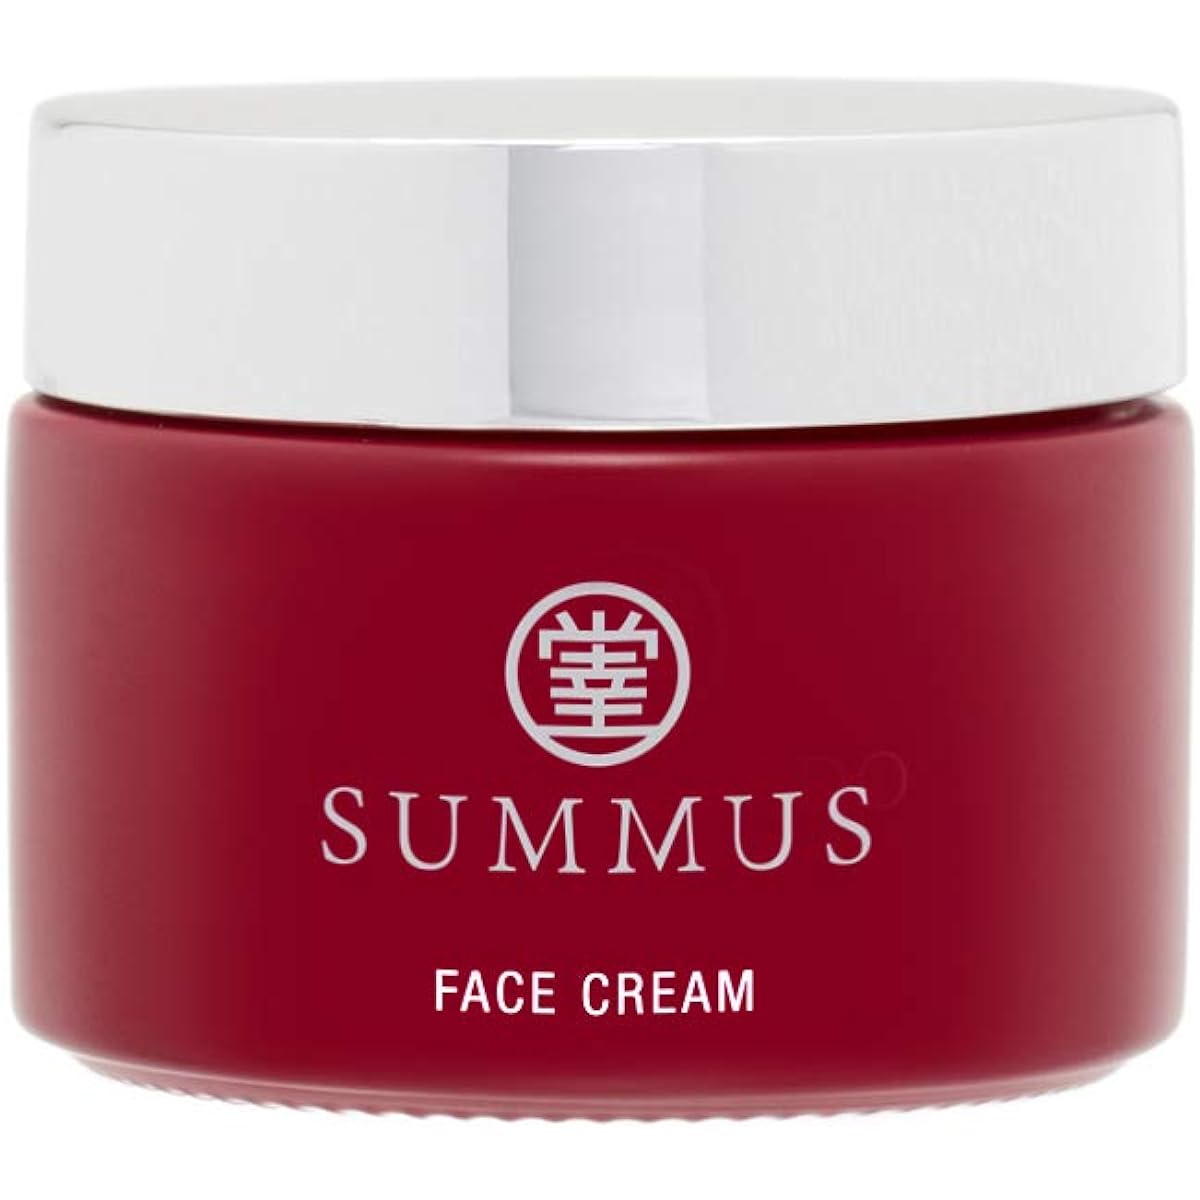 SUMMUS Face Cream [Moisturizing Cream for Face] Contains Hyaluronic Acid Collagen Coenzyme Q10 Made in Japan 45g